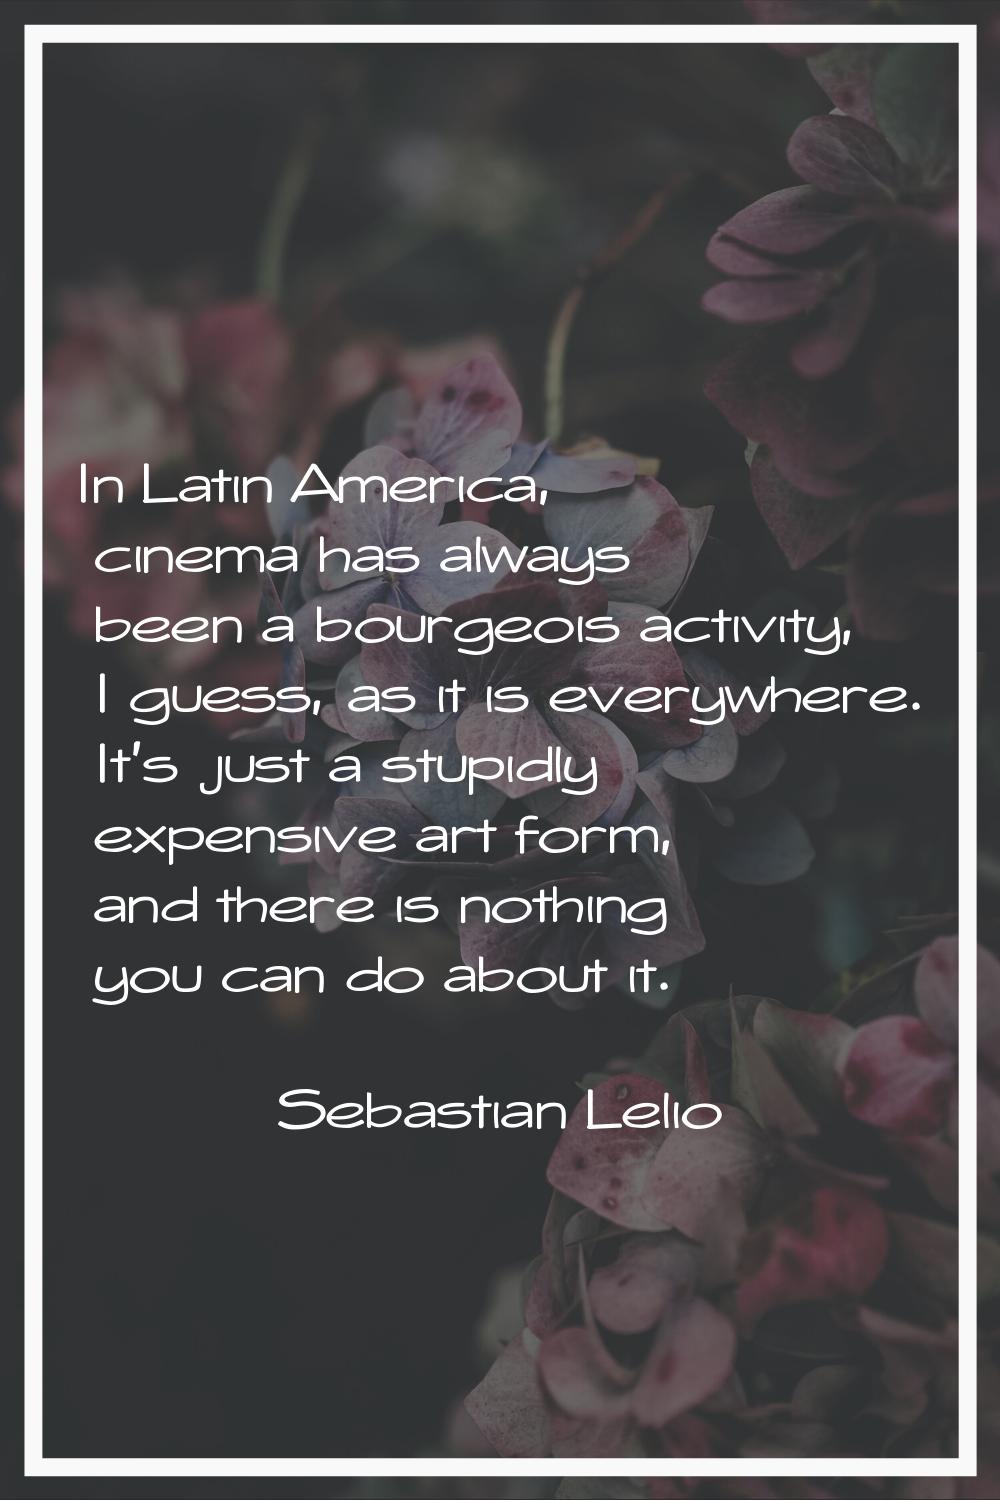 In Latin America, cinema has always been a bourgeois activity, I guess, as it is everywhere. It's j